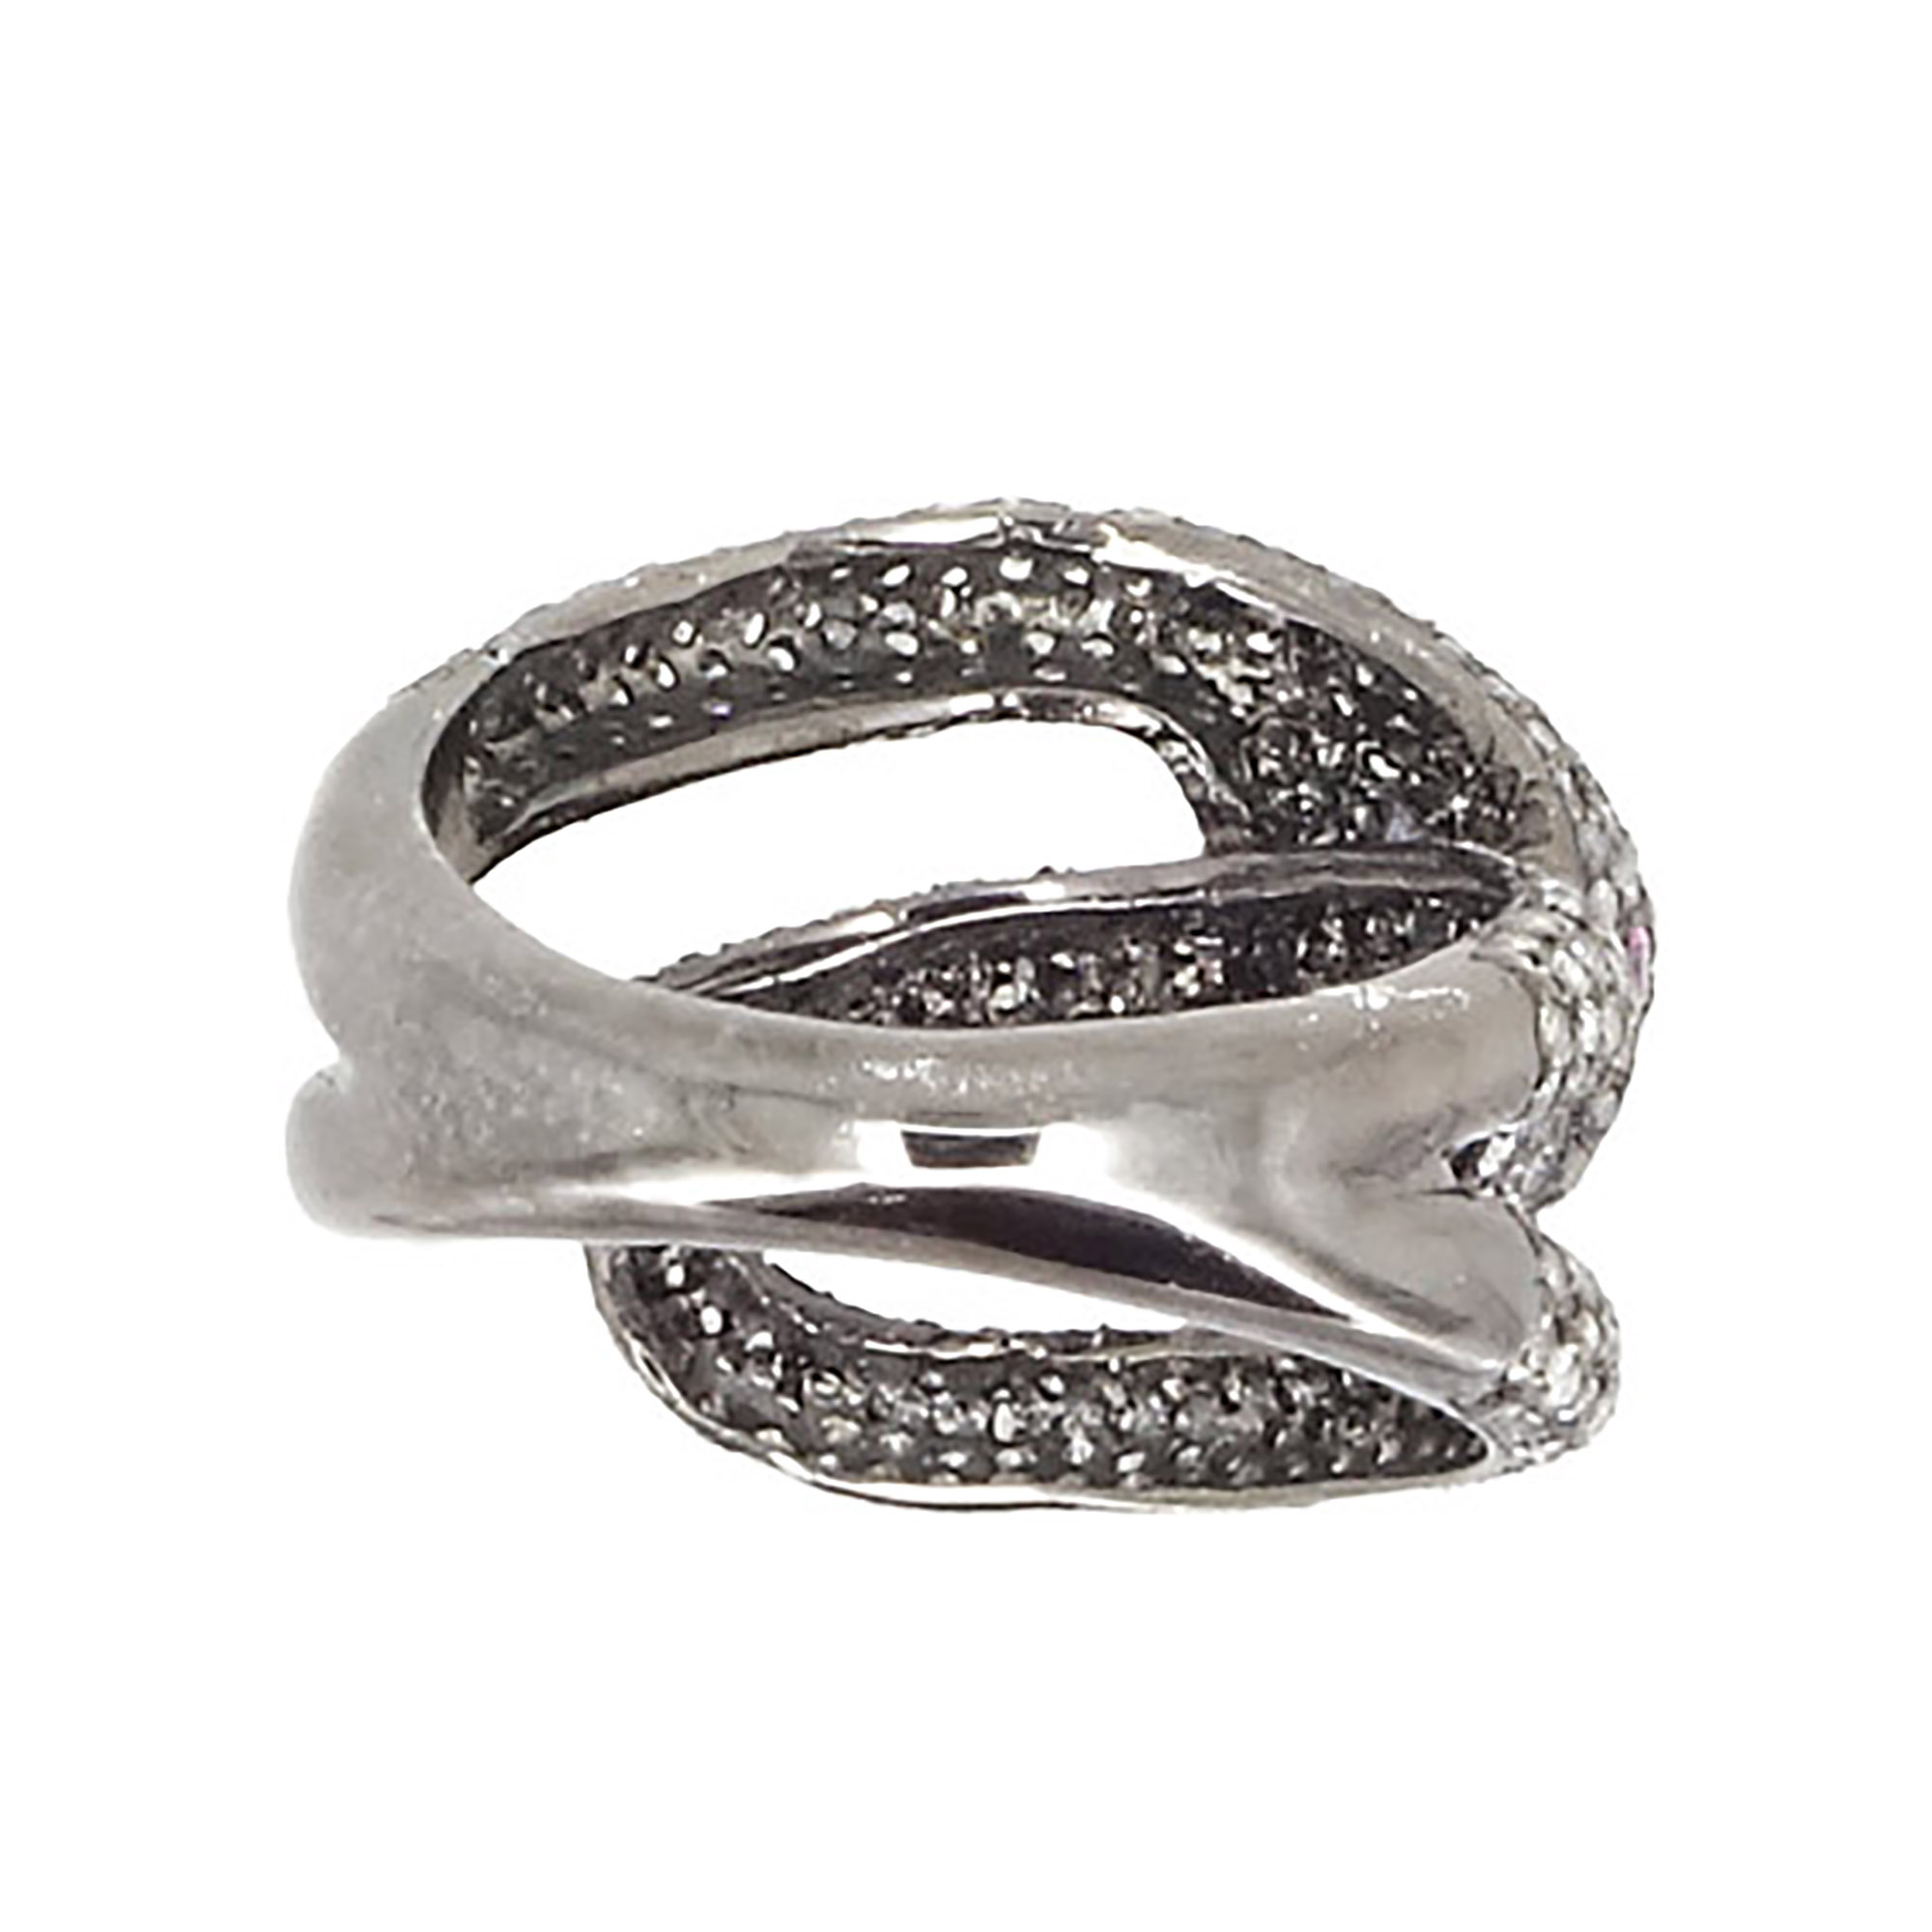 Pave diamond solid silver snake ring